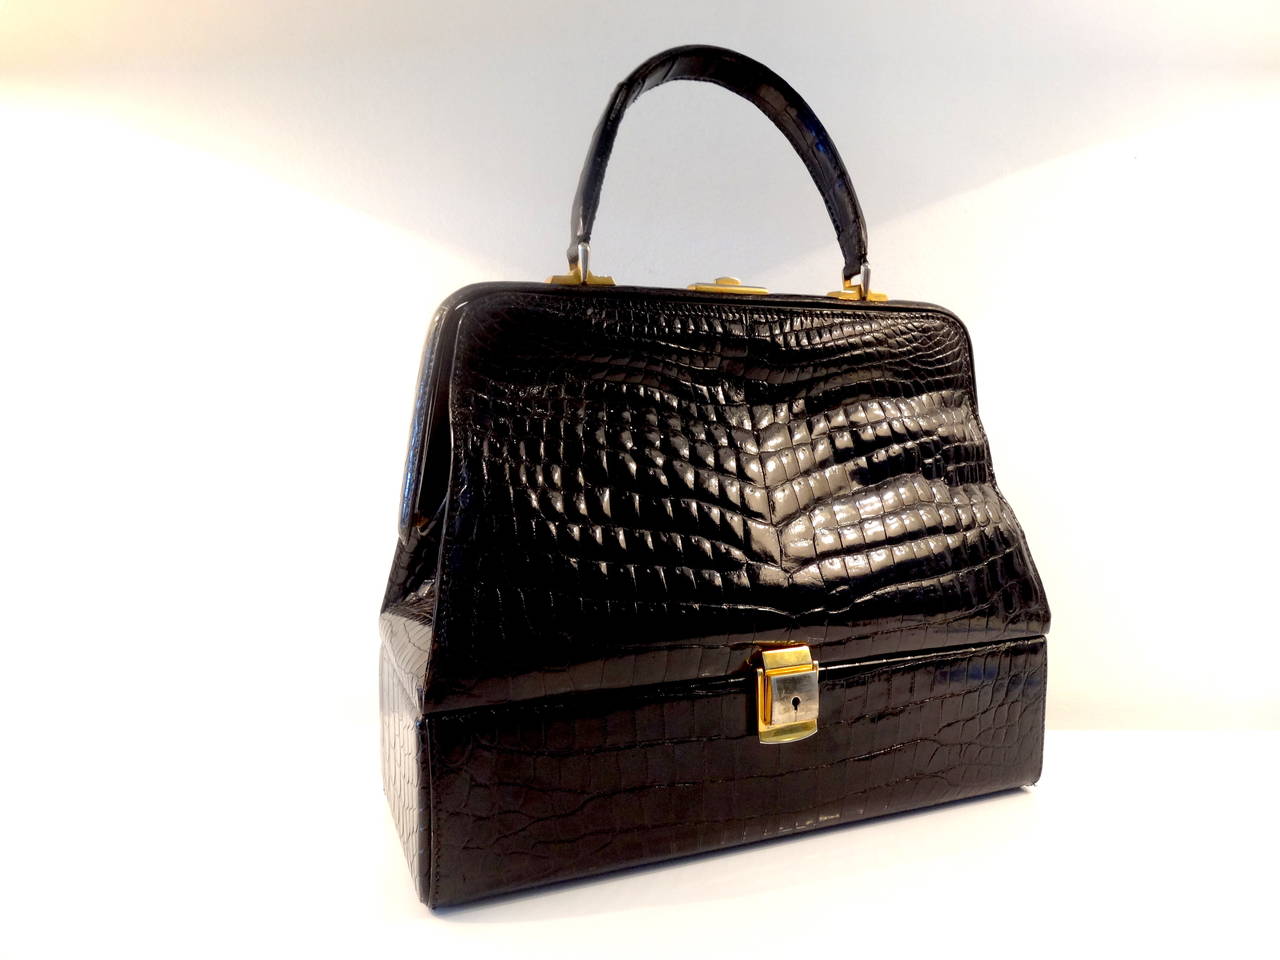 An unusual handbag by Lederer. Bag is finished in a high gloss black crock.
The design of this handbag is most unusual with a hinged base. 
Simple elegant bag.
Height with handle up 15